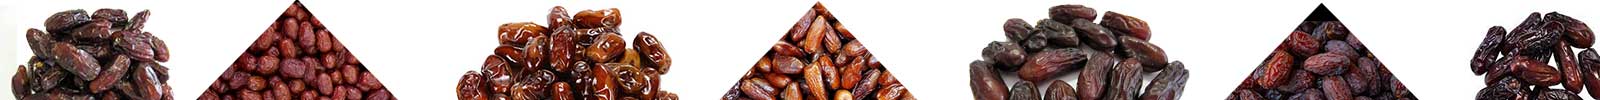 Solutions for dates packaging, dates packaging machine, packaging machine for dates